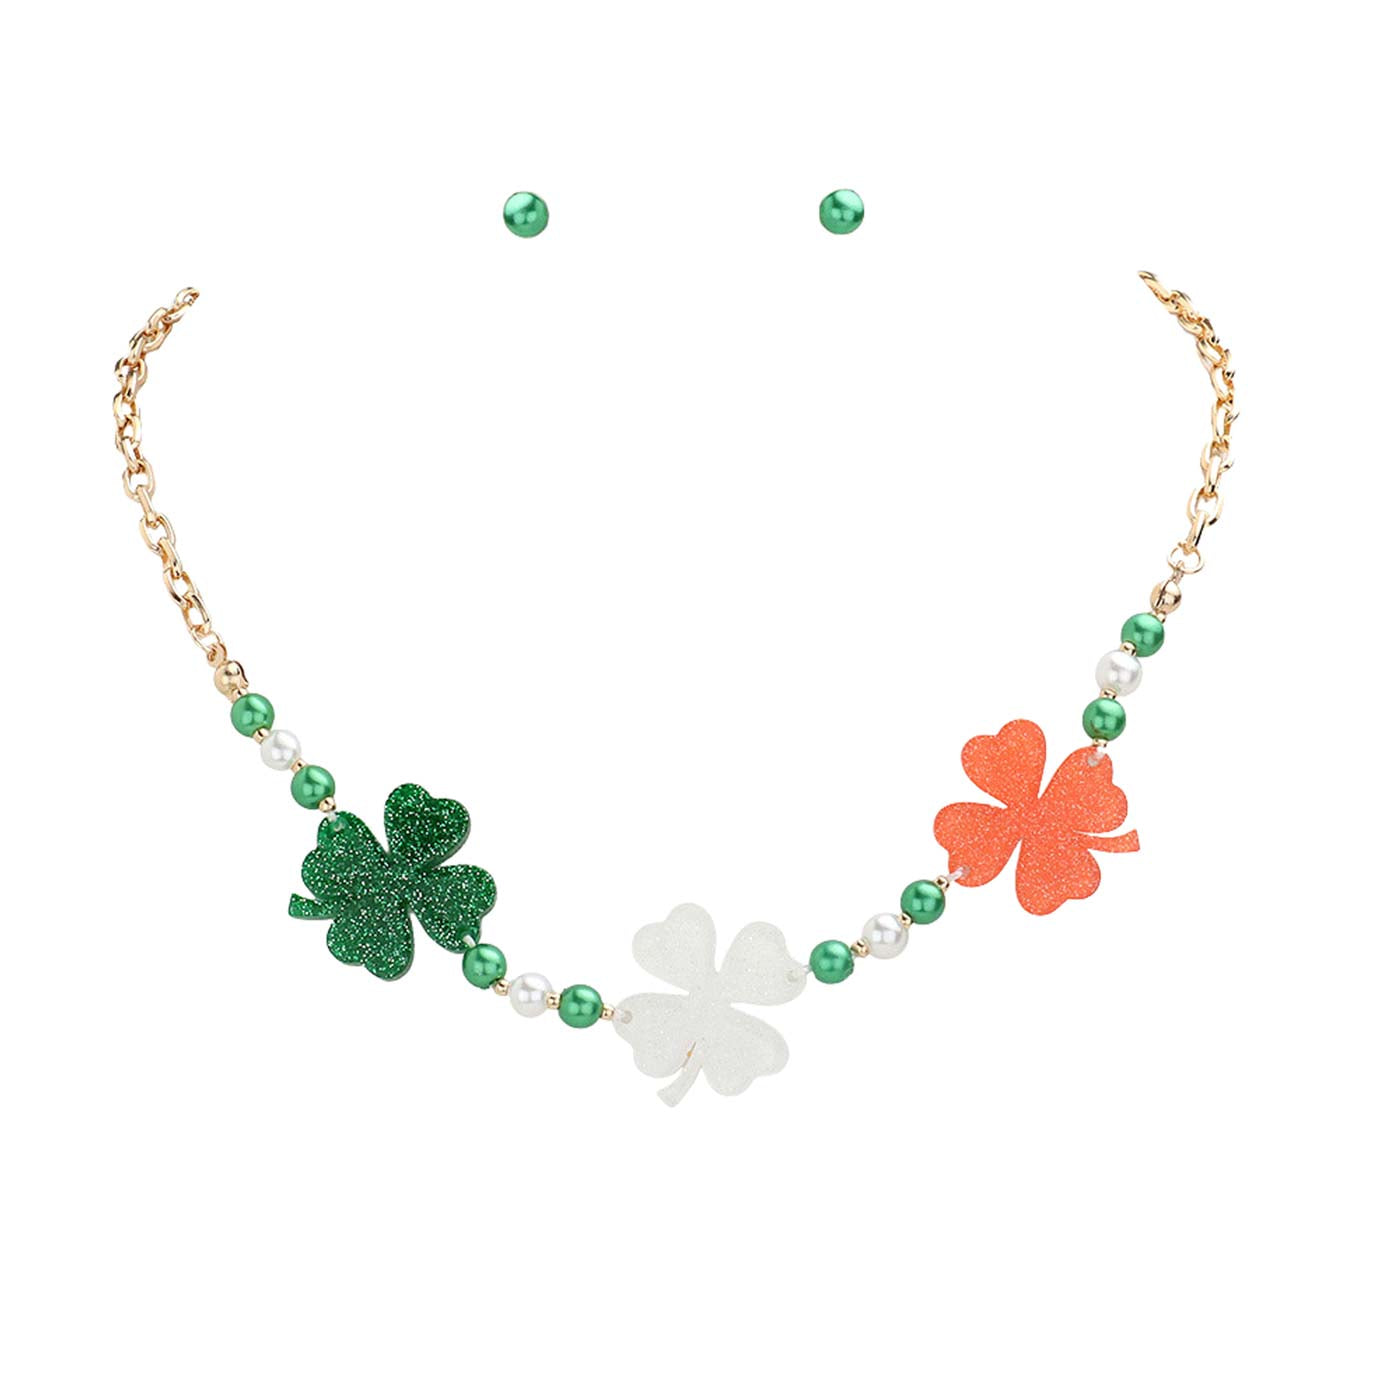 Multi St. Patrick's Day Triple Glittered Resin Clover Pearl Necklace, is perfect to accent your love for the Irish while wearing this beautiful jewelry set. The luck of St. Patrick's Day will be with you this year with these beautiful pearl pendant necklaces. These cute glittered resin necklaces are the perfect accessory to finish off St. Patrick's Day or any festive look. Show your unique & beautiful choice with this St. Patrick's Day clover pearl nec